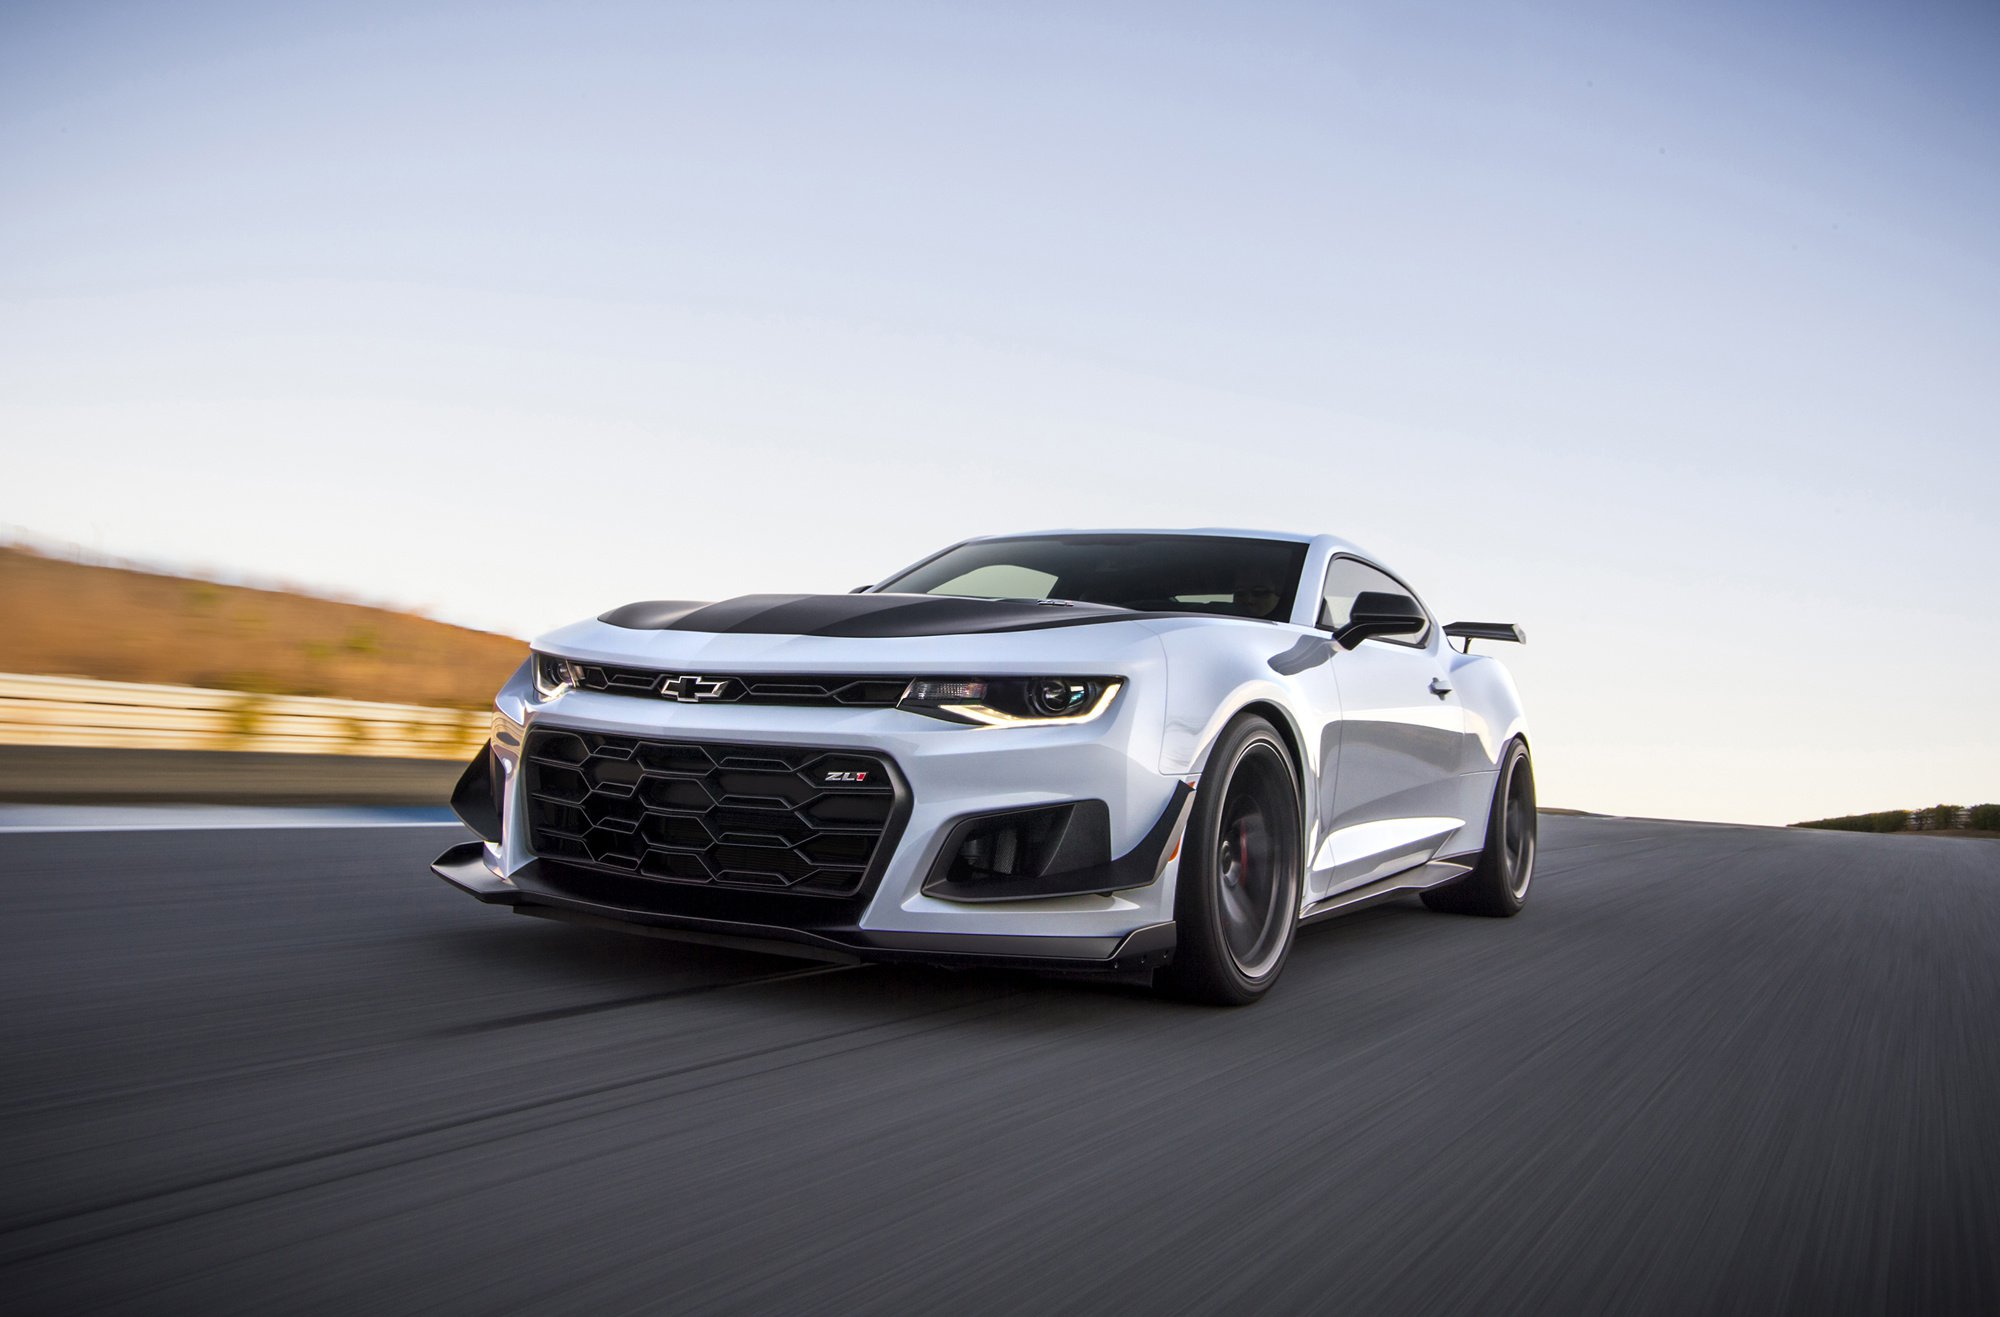 Chevrolet Camaro ZL1 1LE front angle view